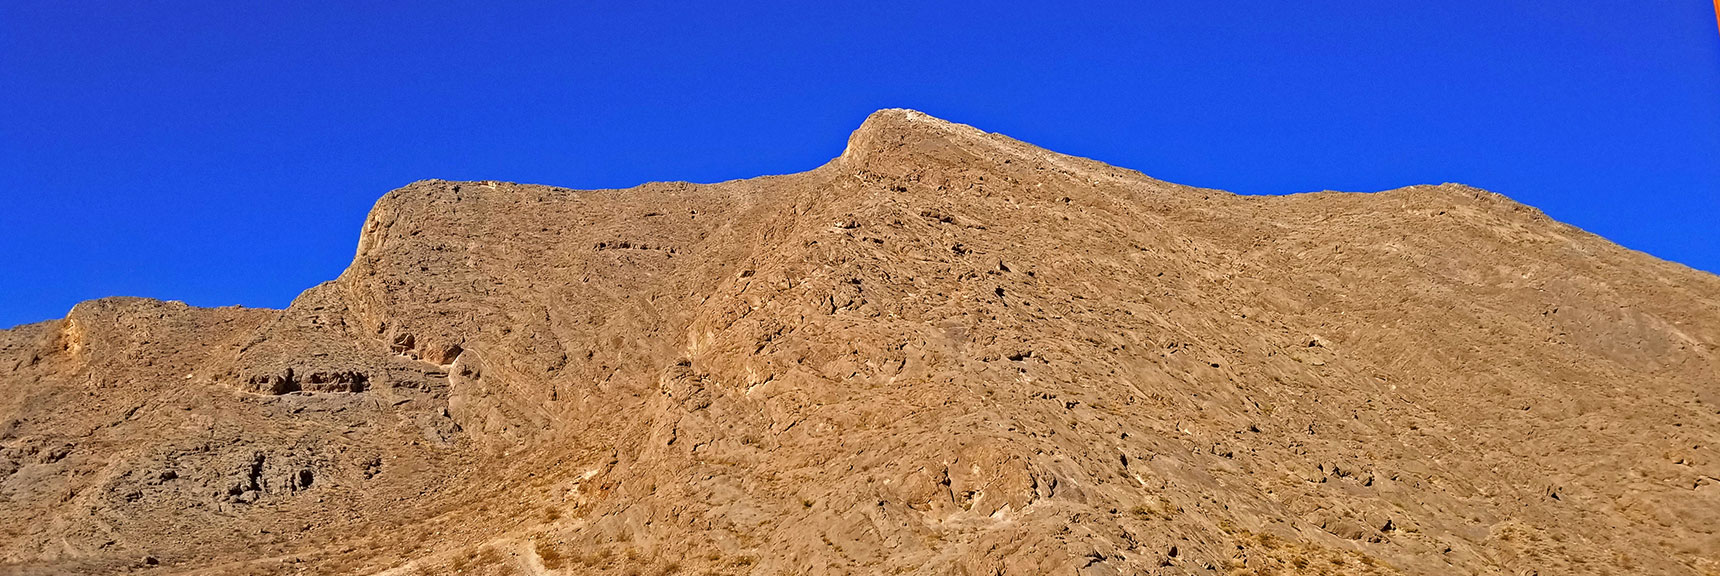 Every View of Lone Mountain During Circuit of Base. This is Eastern View | Lone Mountain | Las Vegas, Nevada